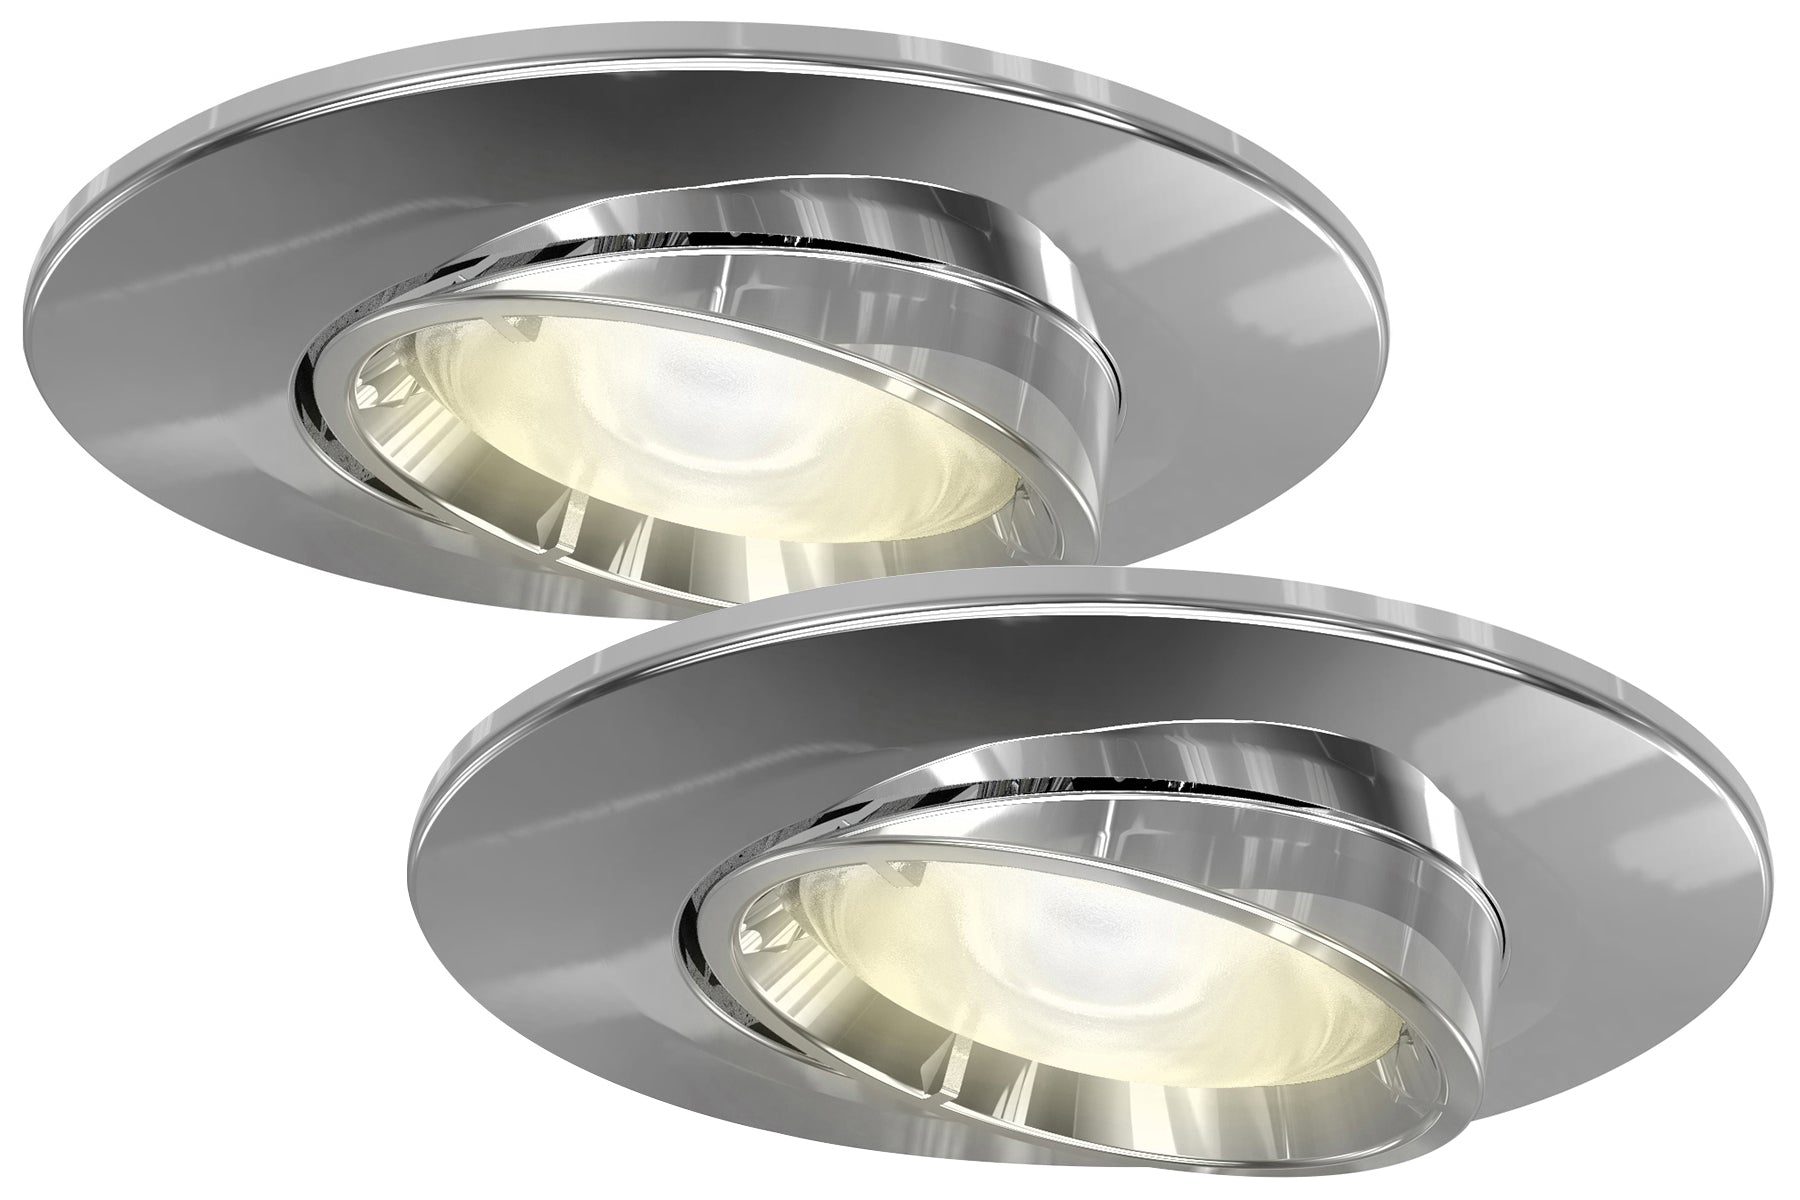 4lite WiZ Connected Fire-Rated IP20 GU10 Smart Adjustable LED Downlight - Chrome (Pack of 2)